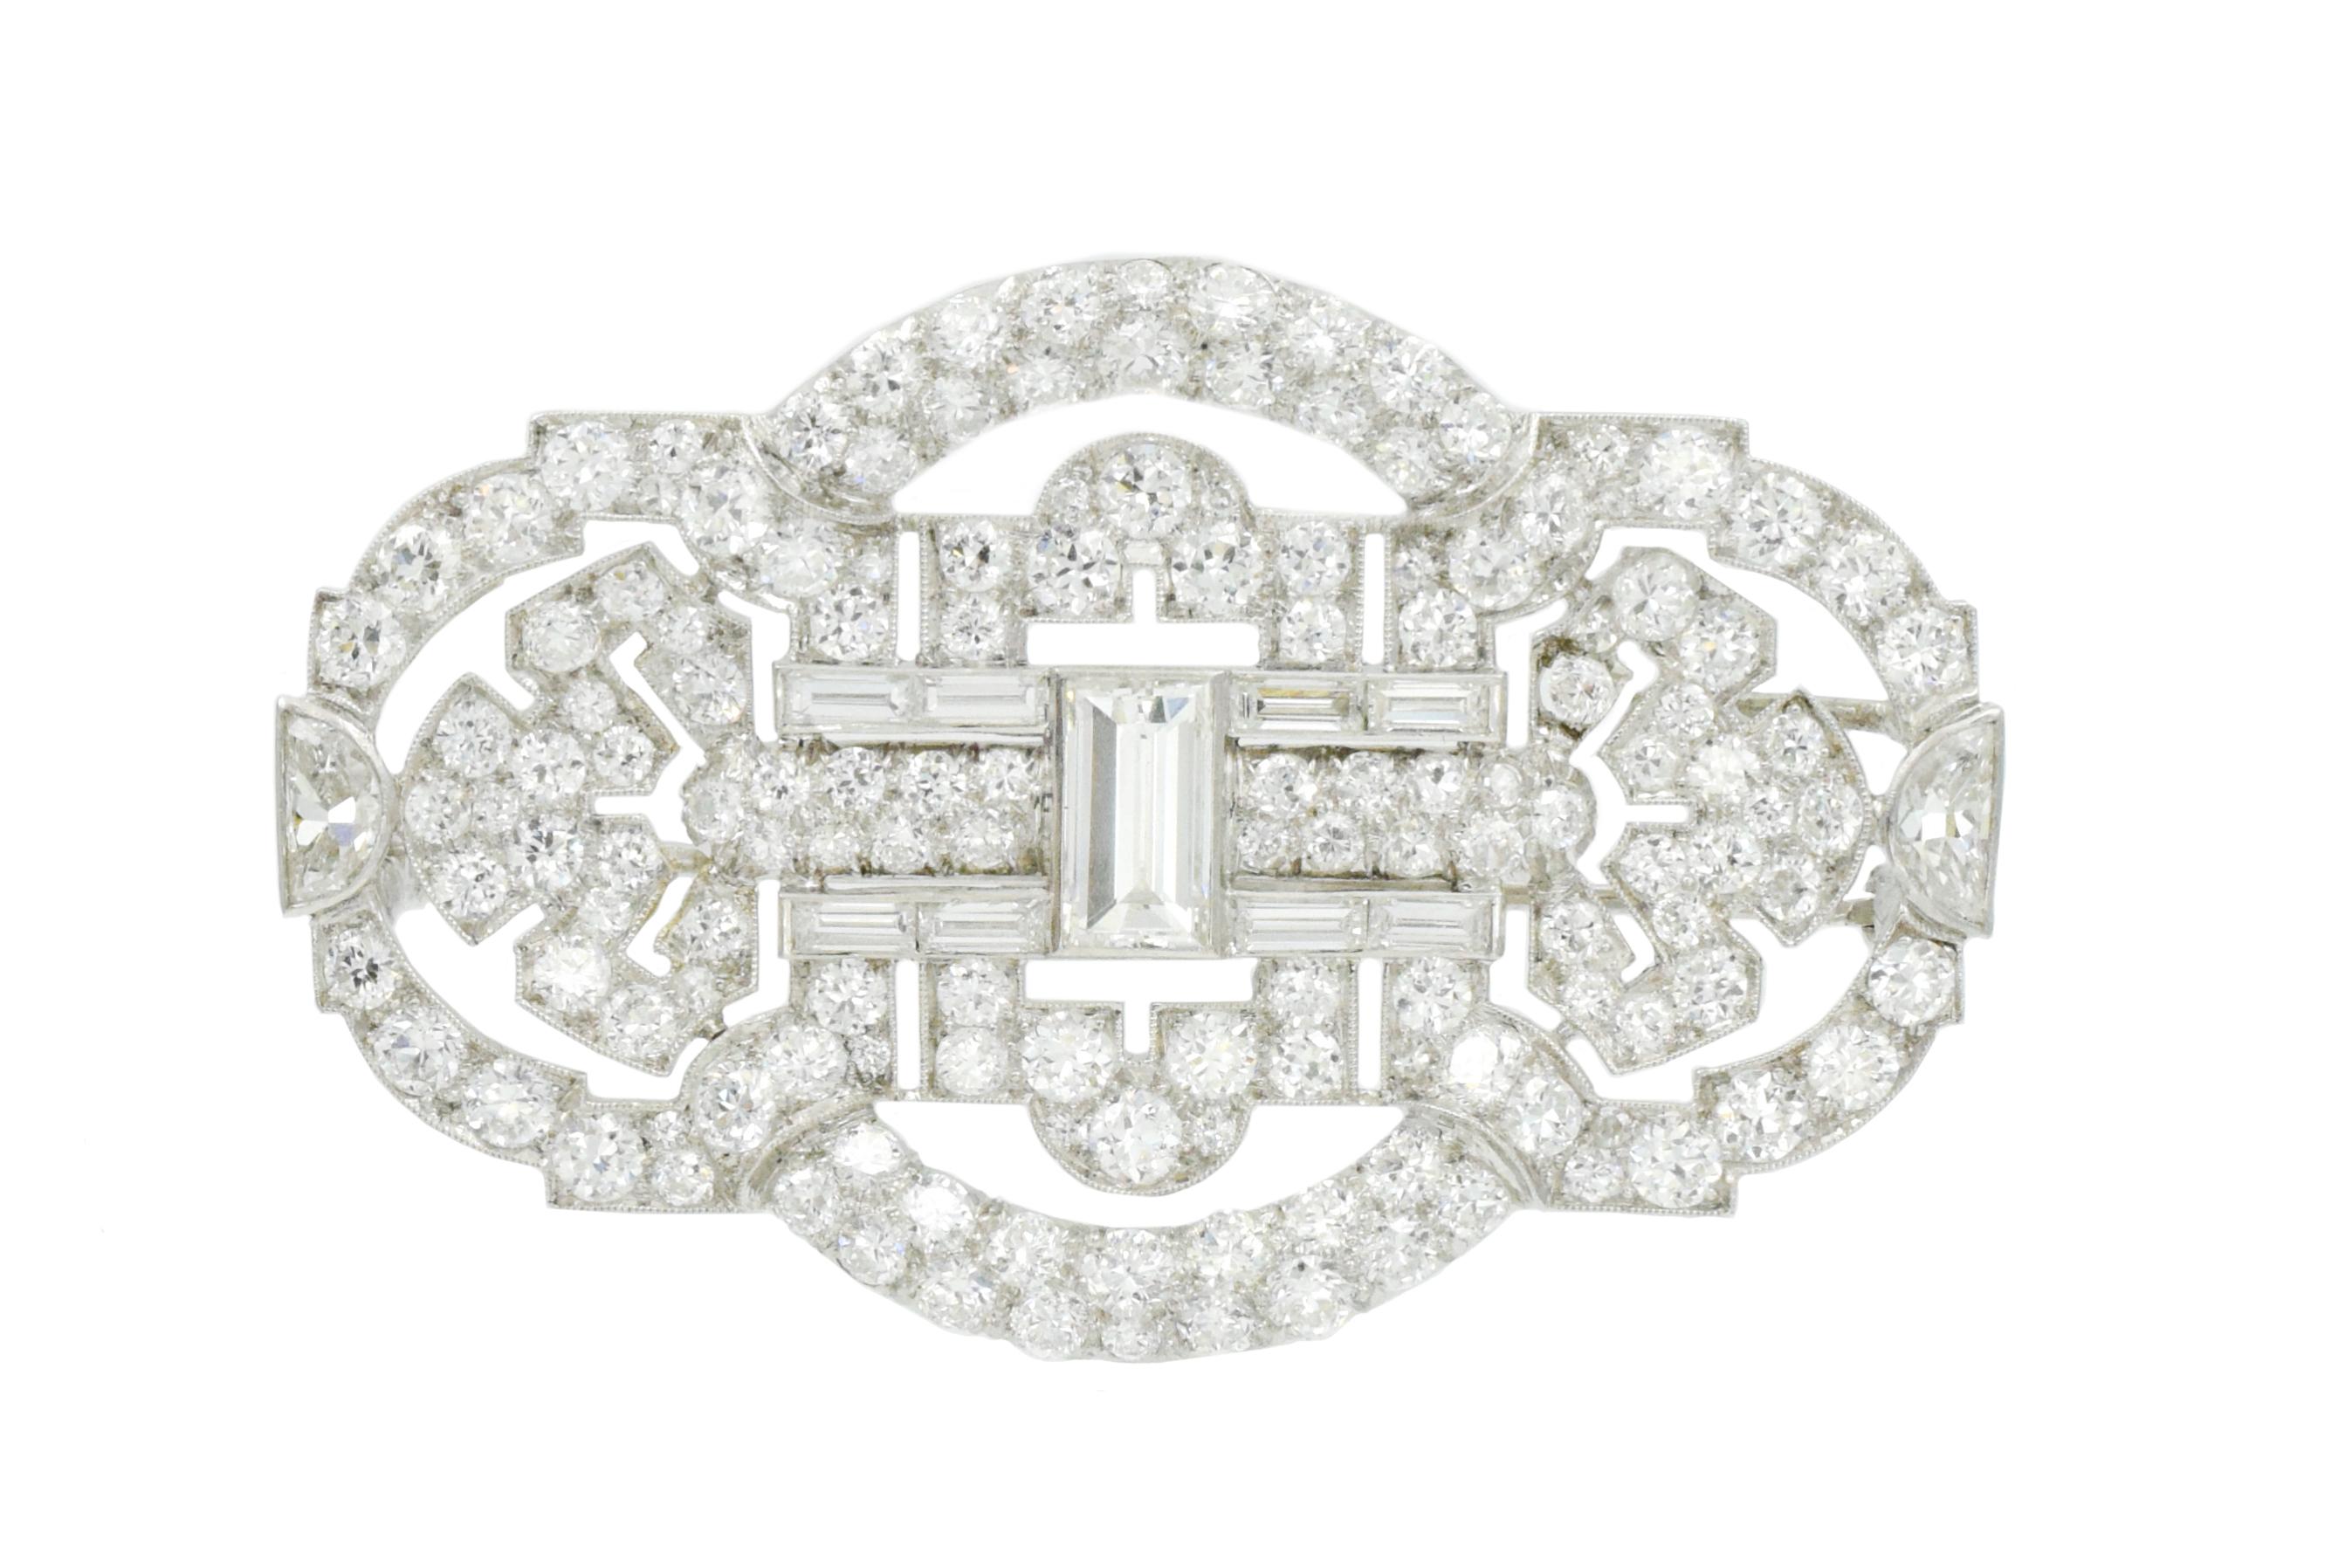 Art Deco Diamond Brooch in platinum. In the center vertically set  baguette cut diamond weighing
approximately 1.00 carat. The rest of this beautiful pin set with old European / round brilliant transitional cut, baguette cut and half moon cut